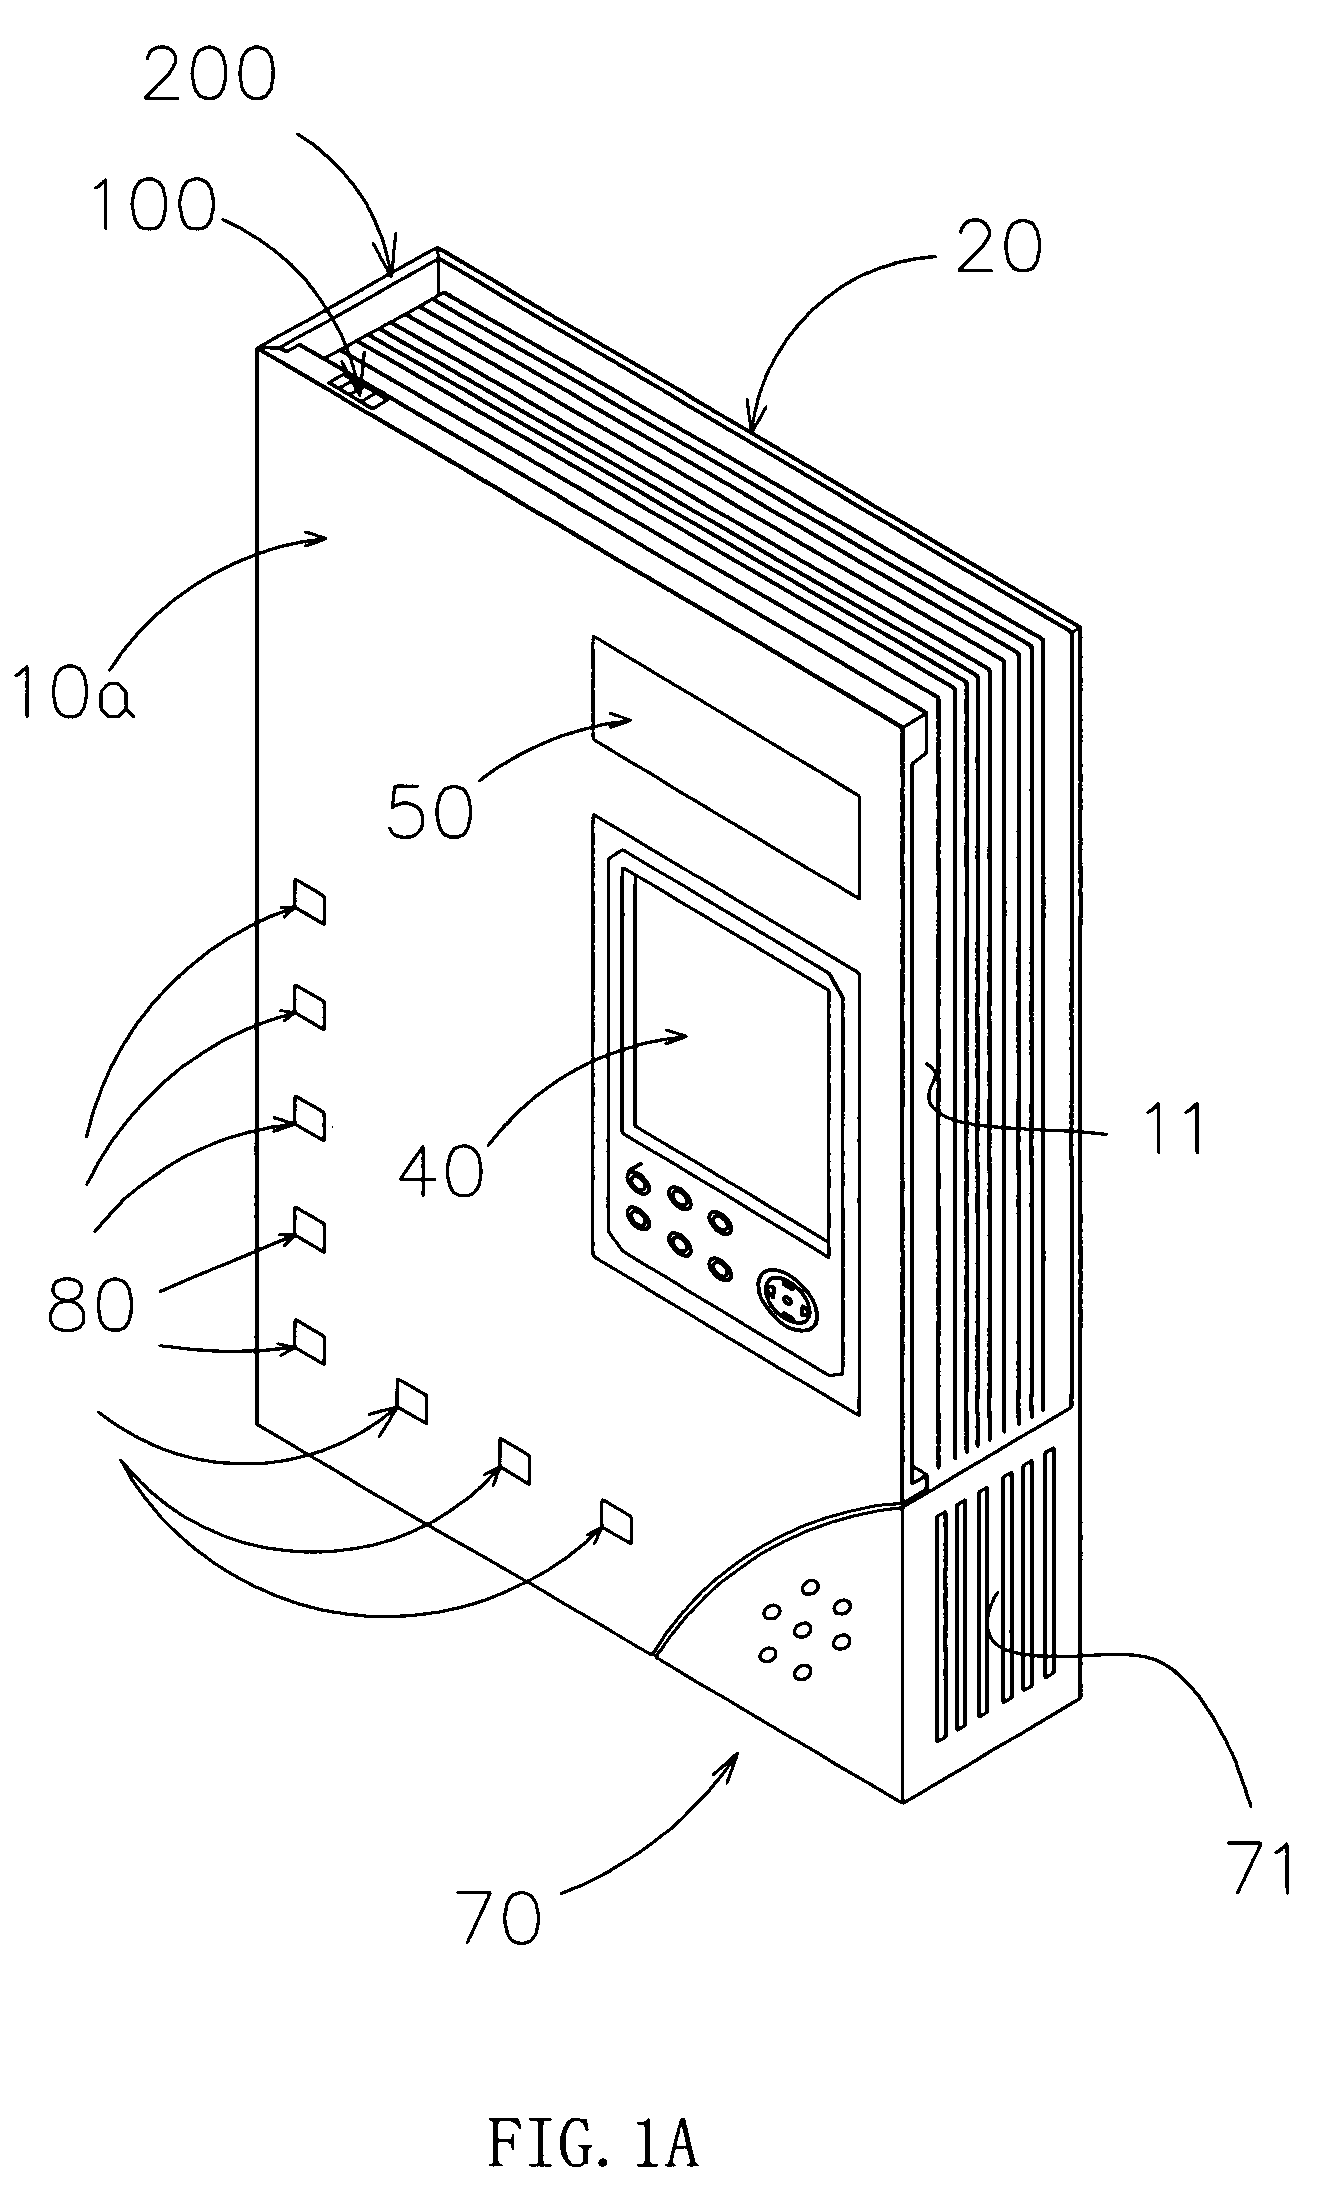 Multifunctional cover device with a detachable PDA device